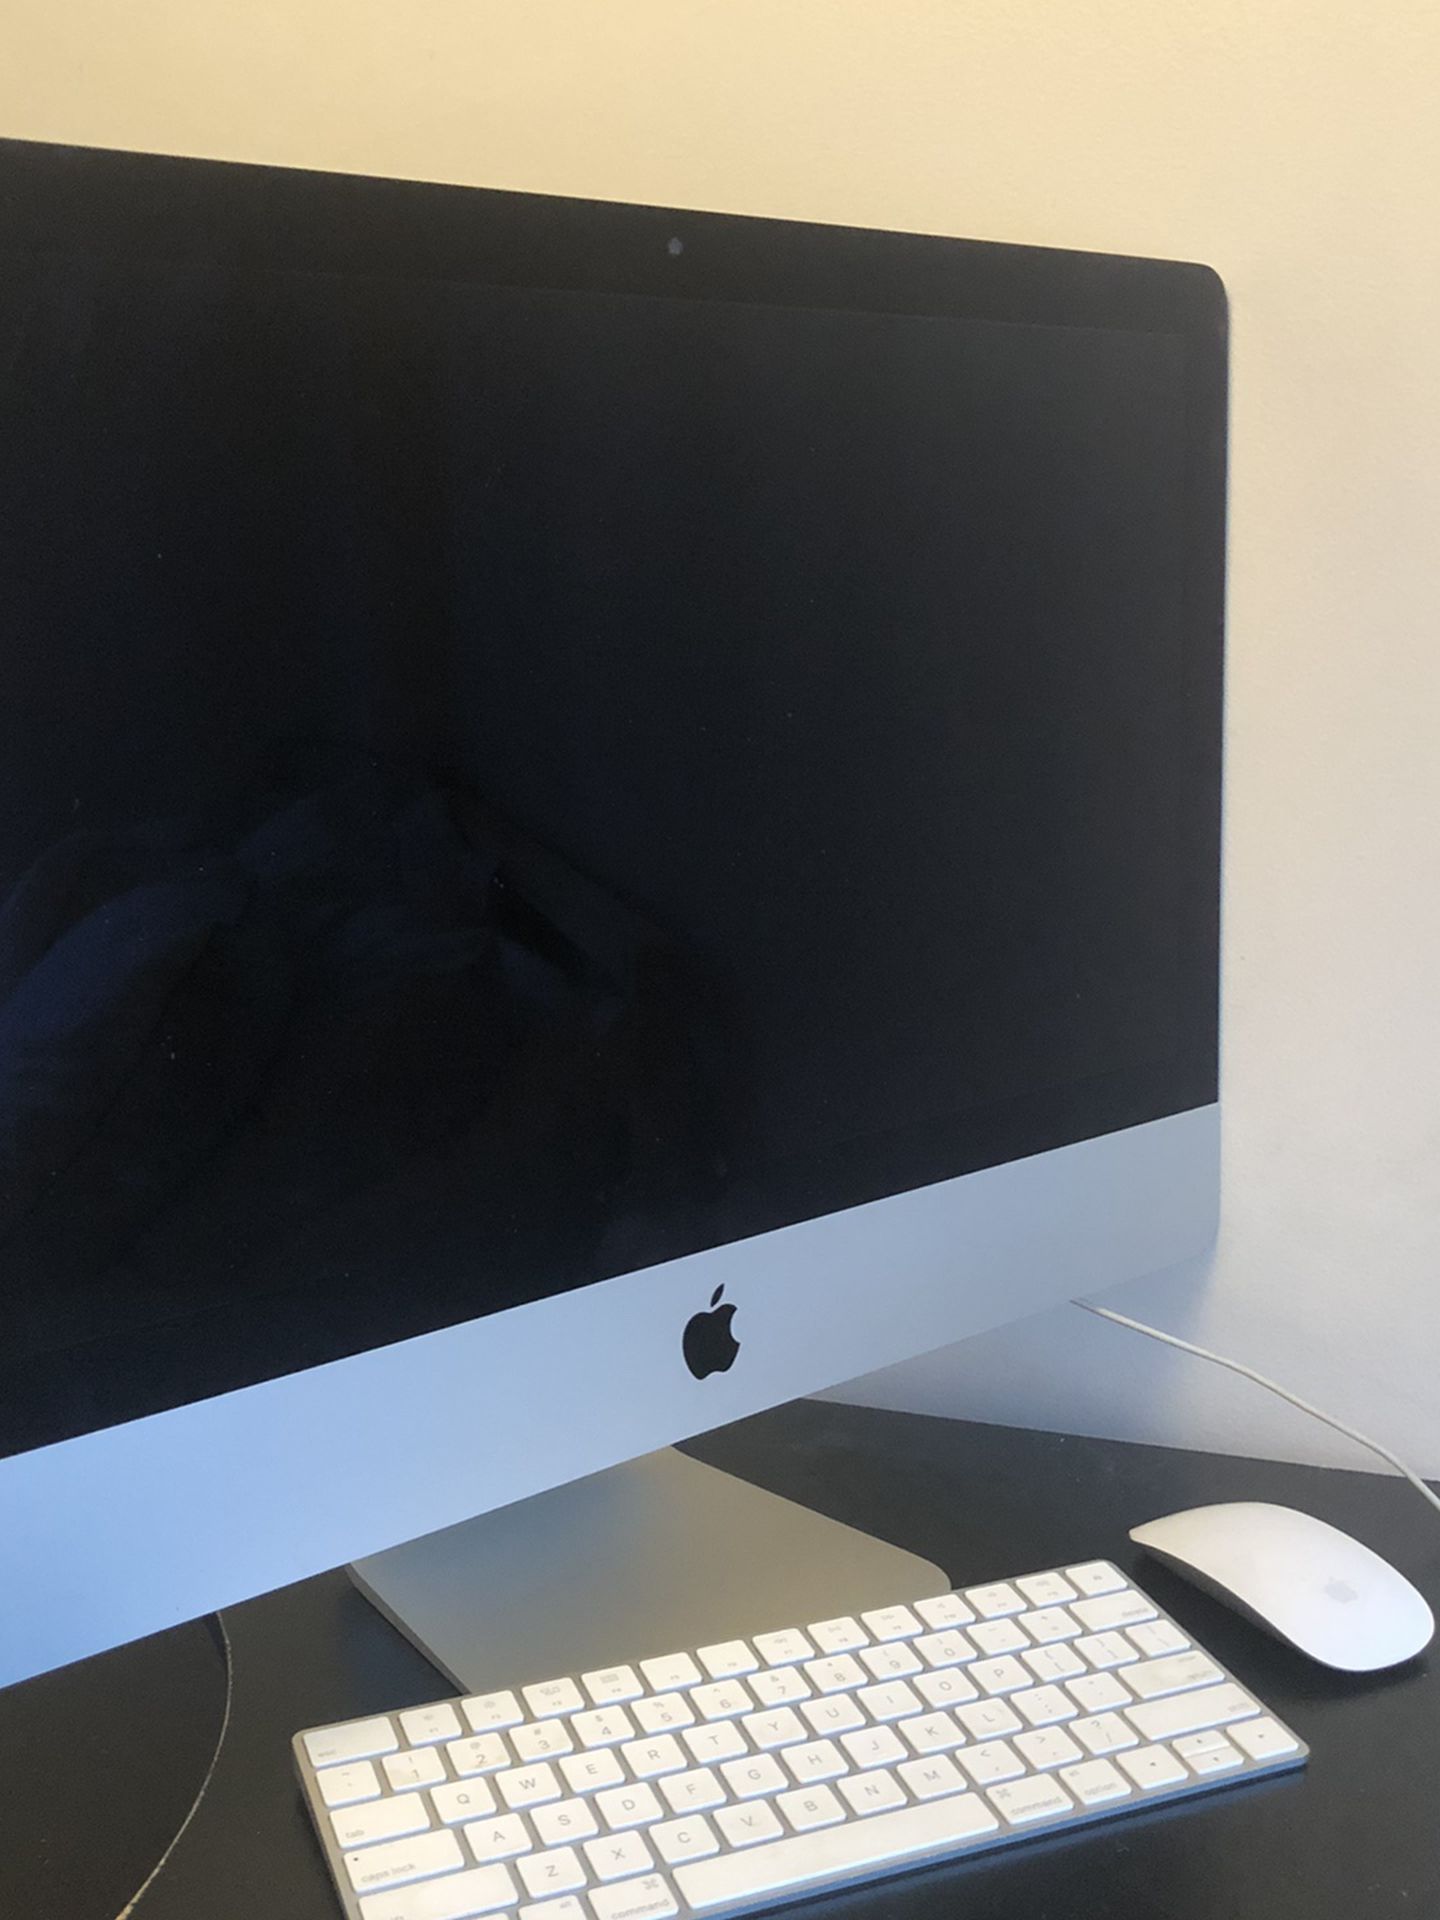 IMAC for sale in great condition